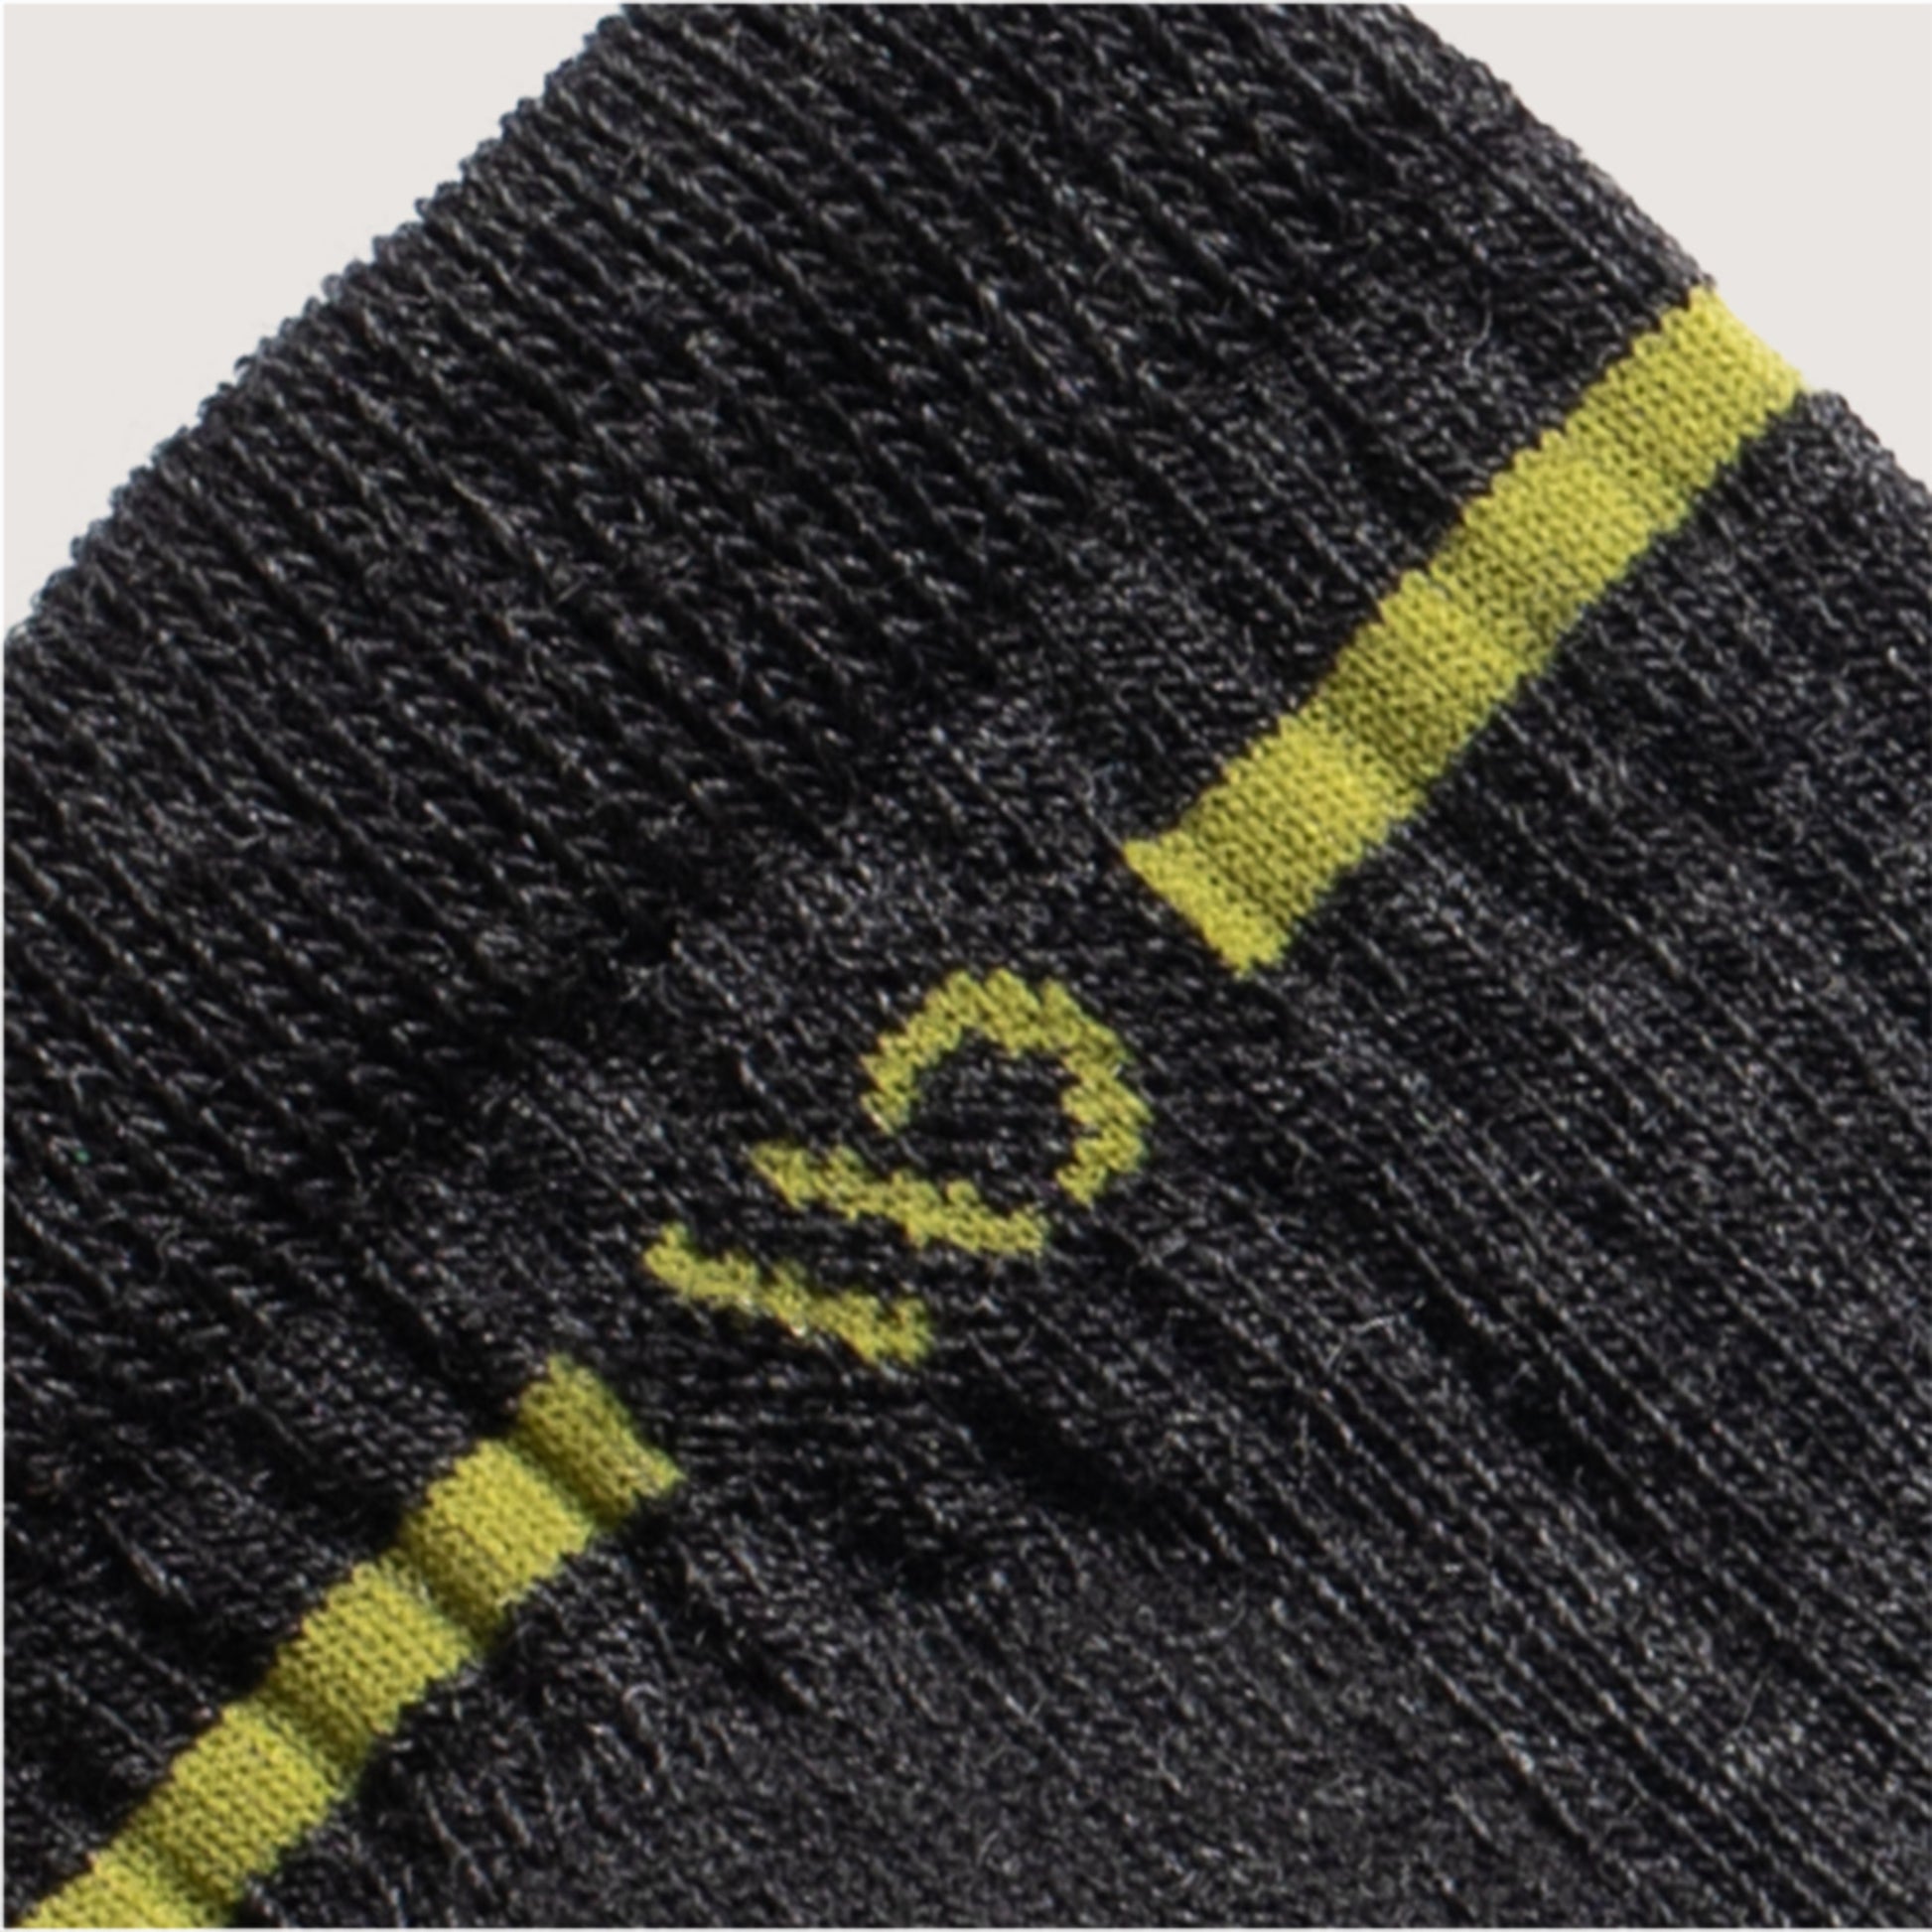 Detail featuring a yellow logo and stripe around the cuff--Charcoal